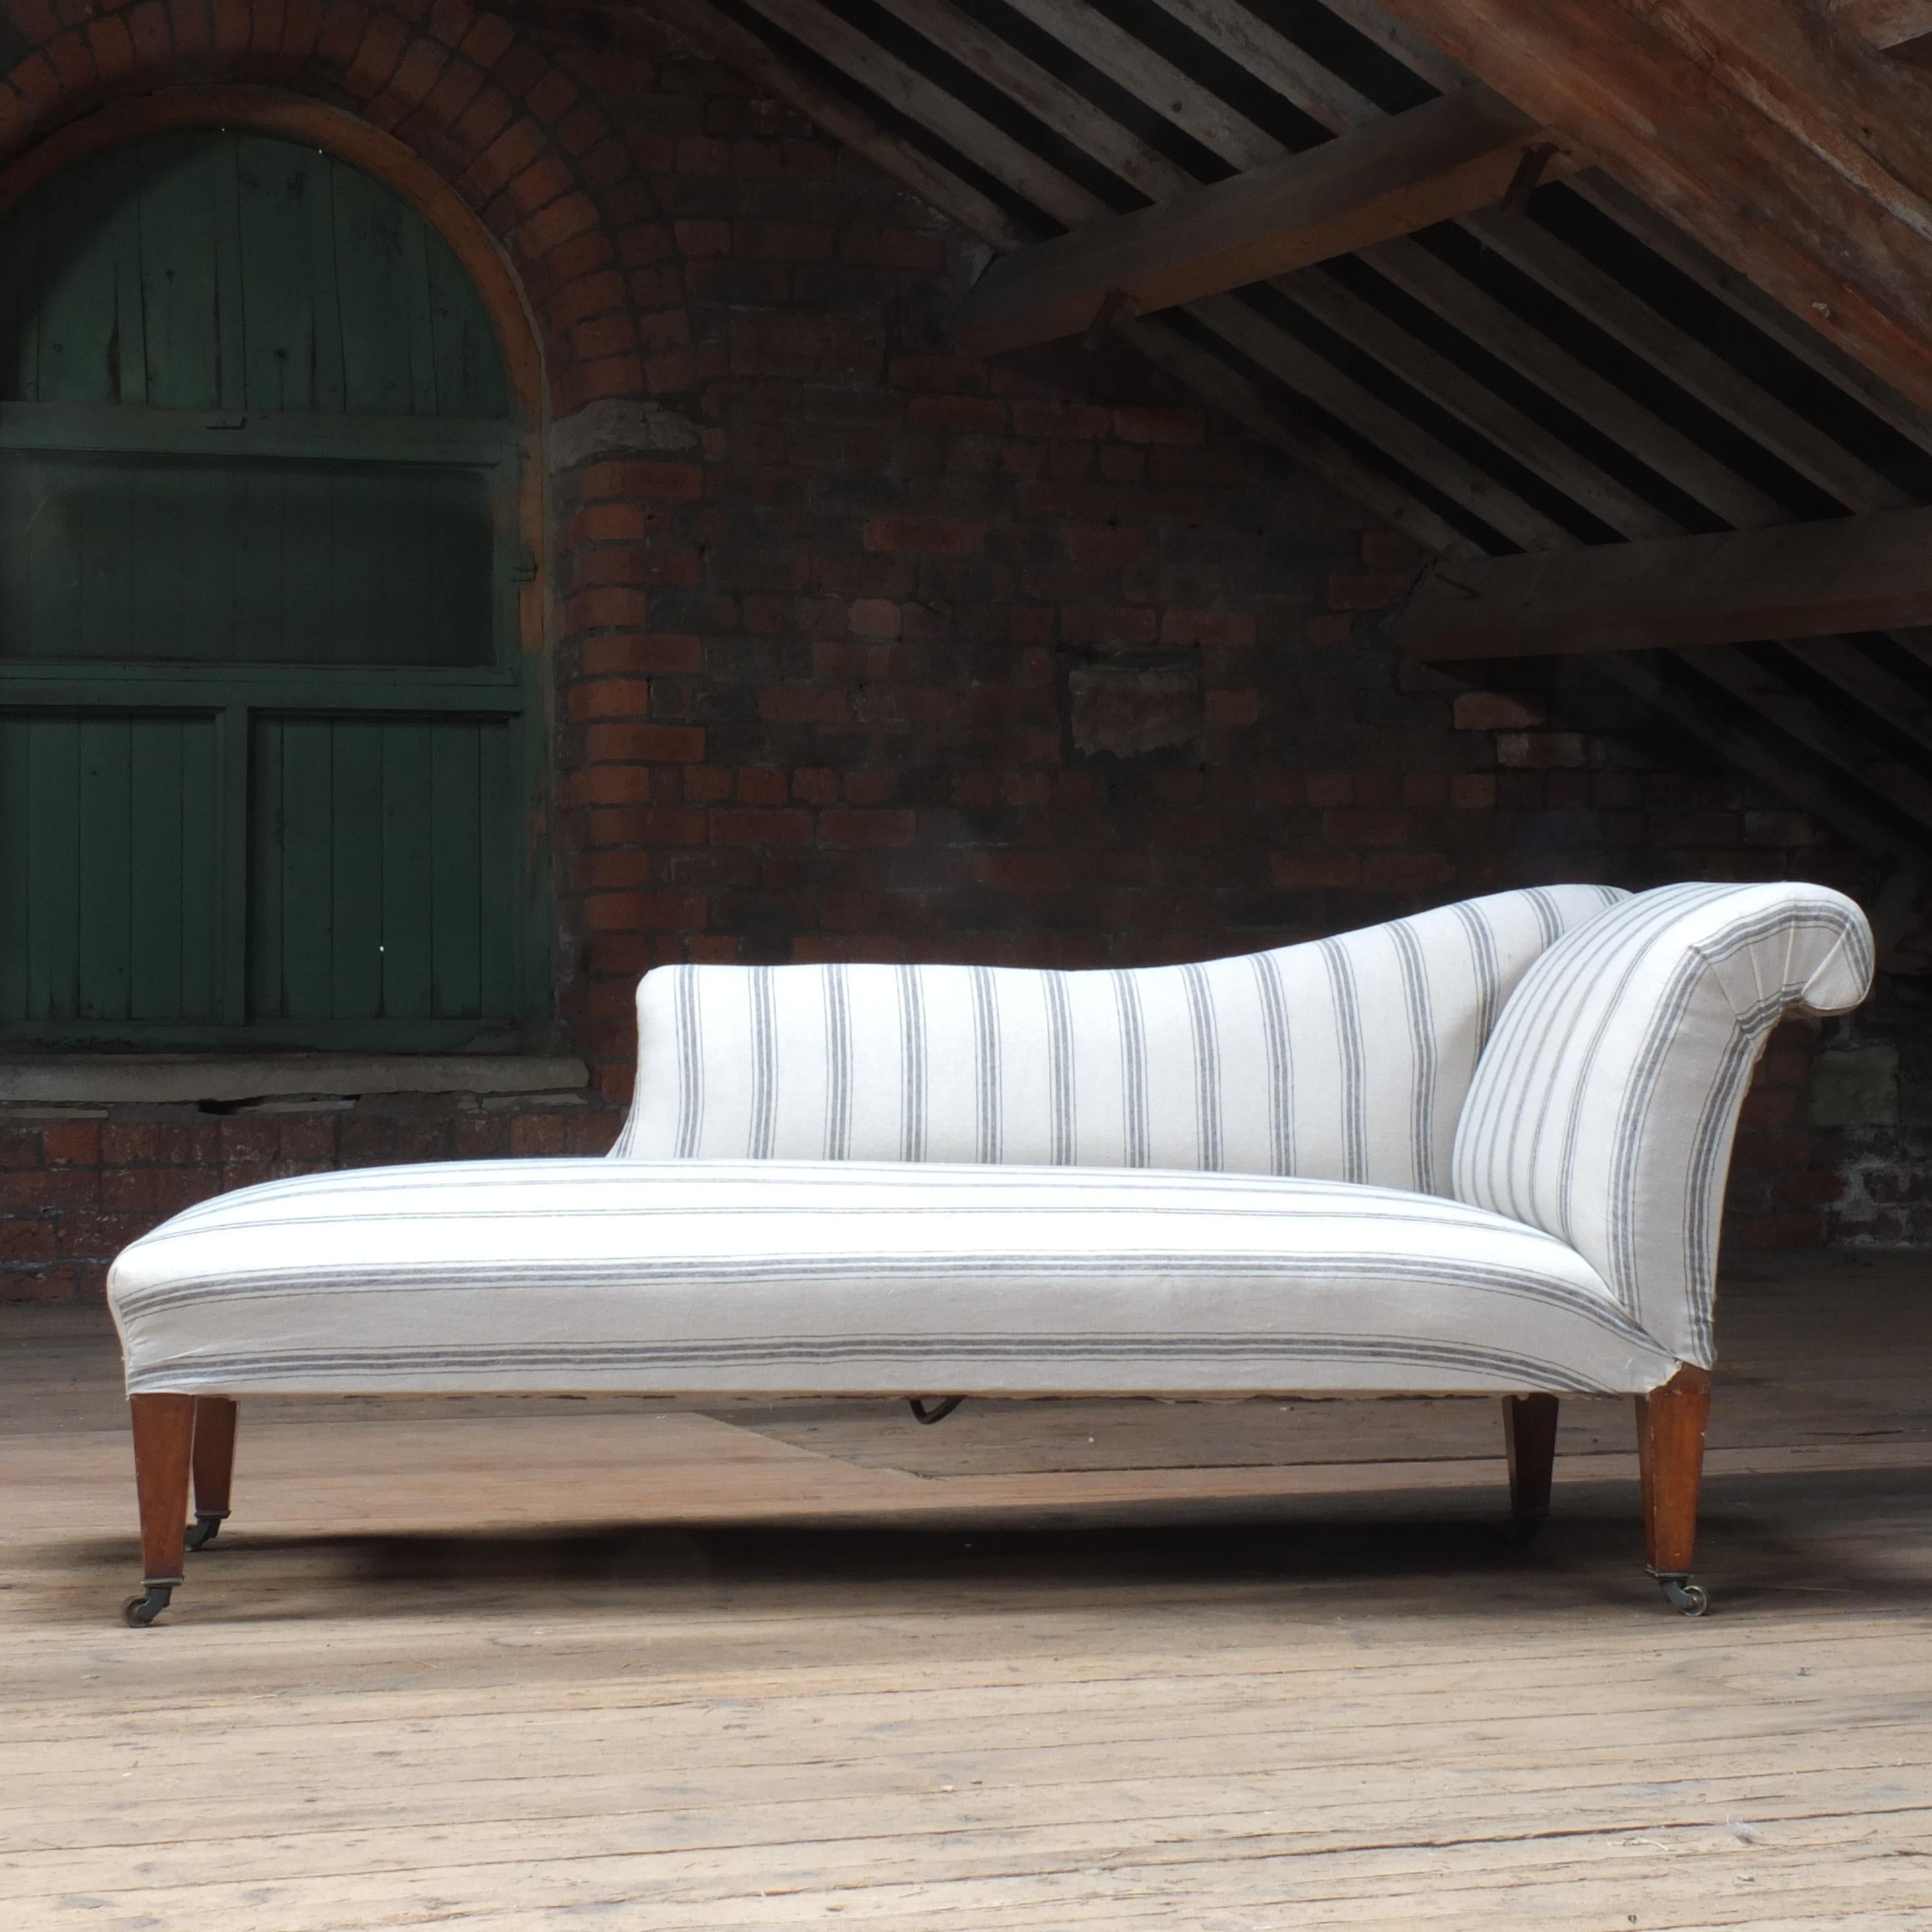 Late Victorian Antique 19th Century English Country House Chaise Lounge C1890